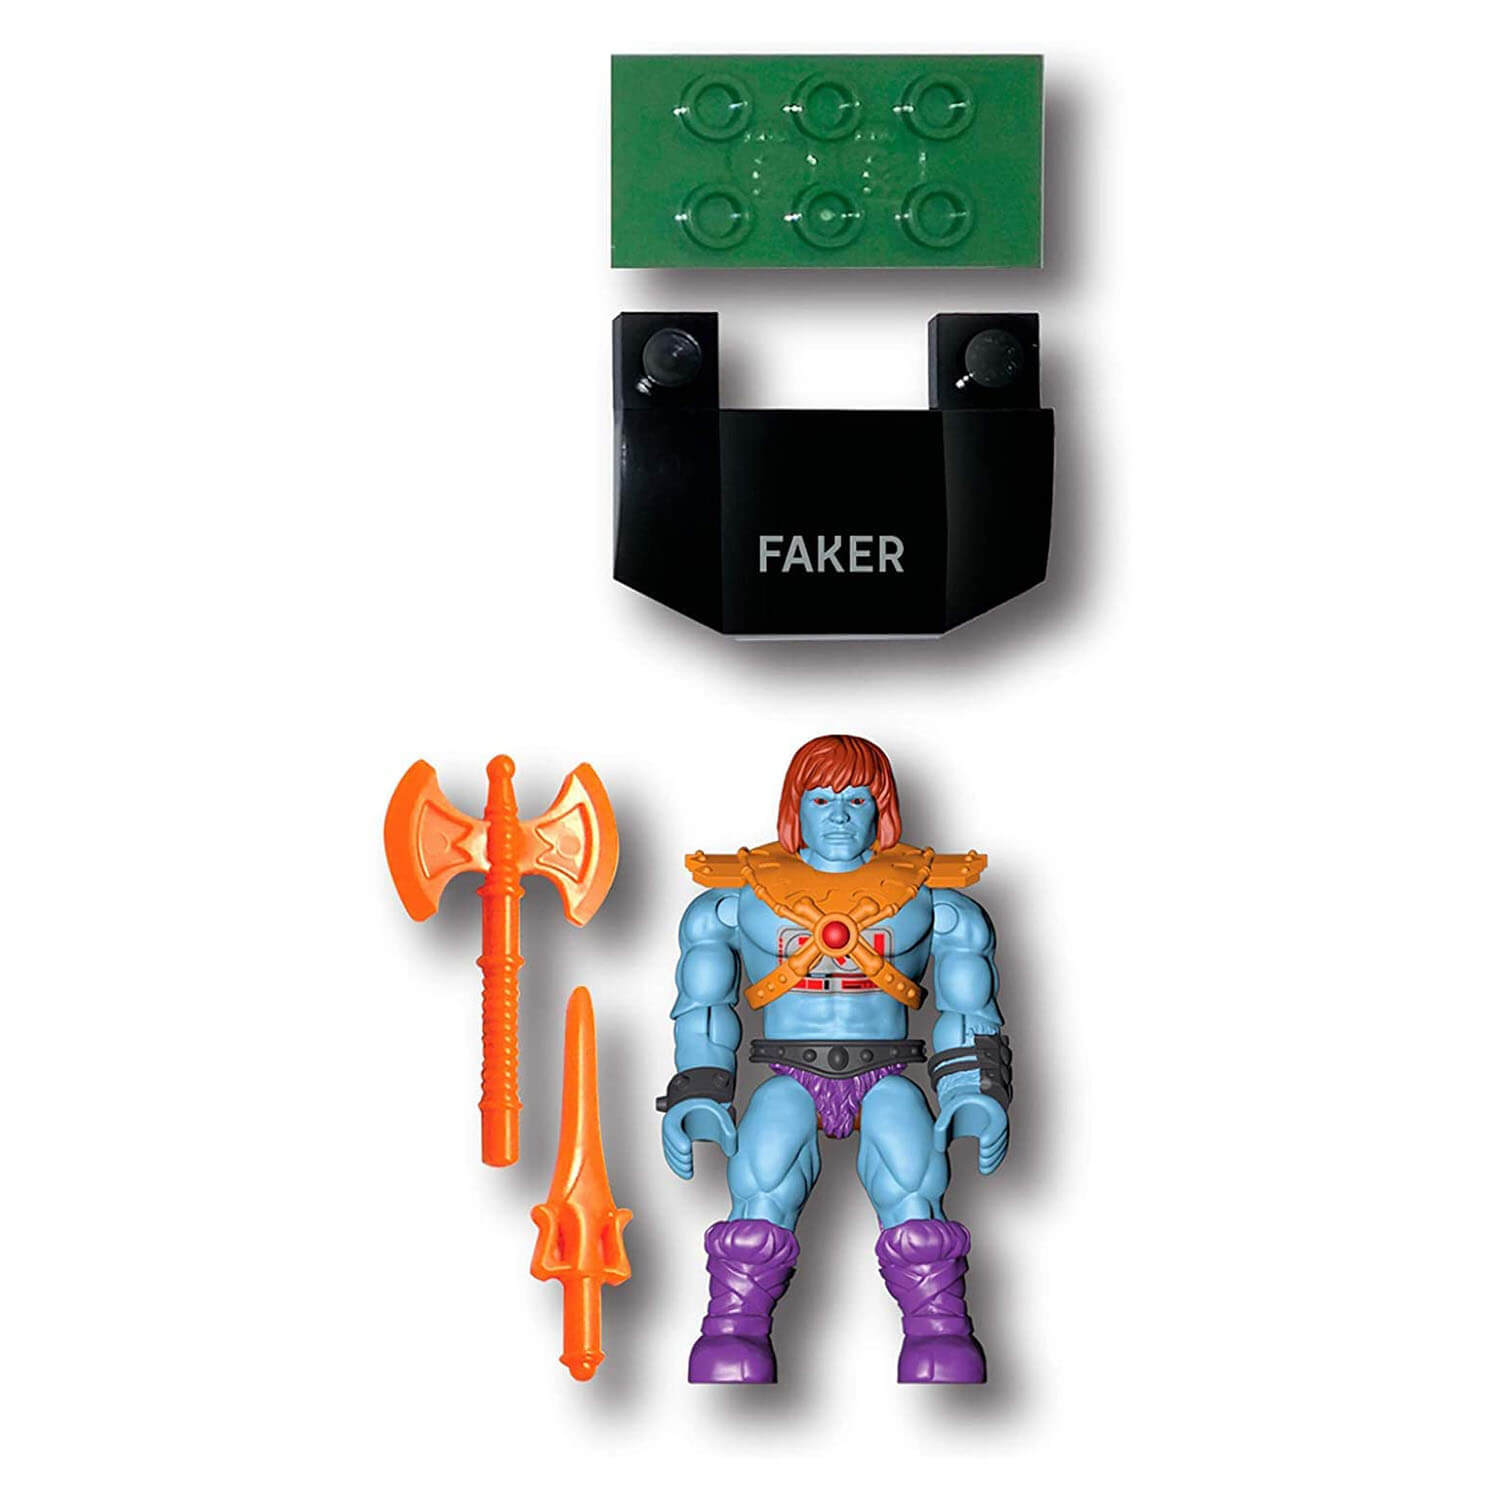 Front view of the faker figure.